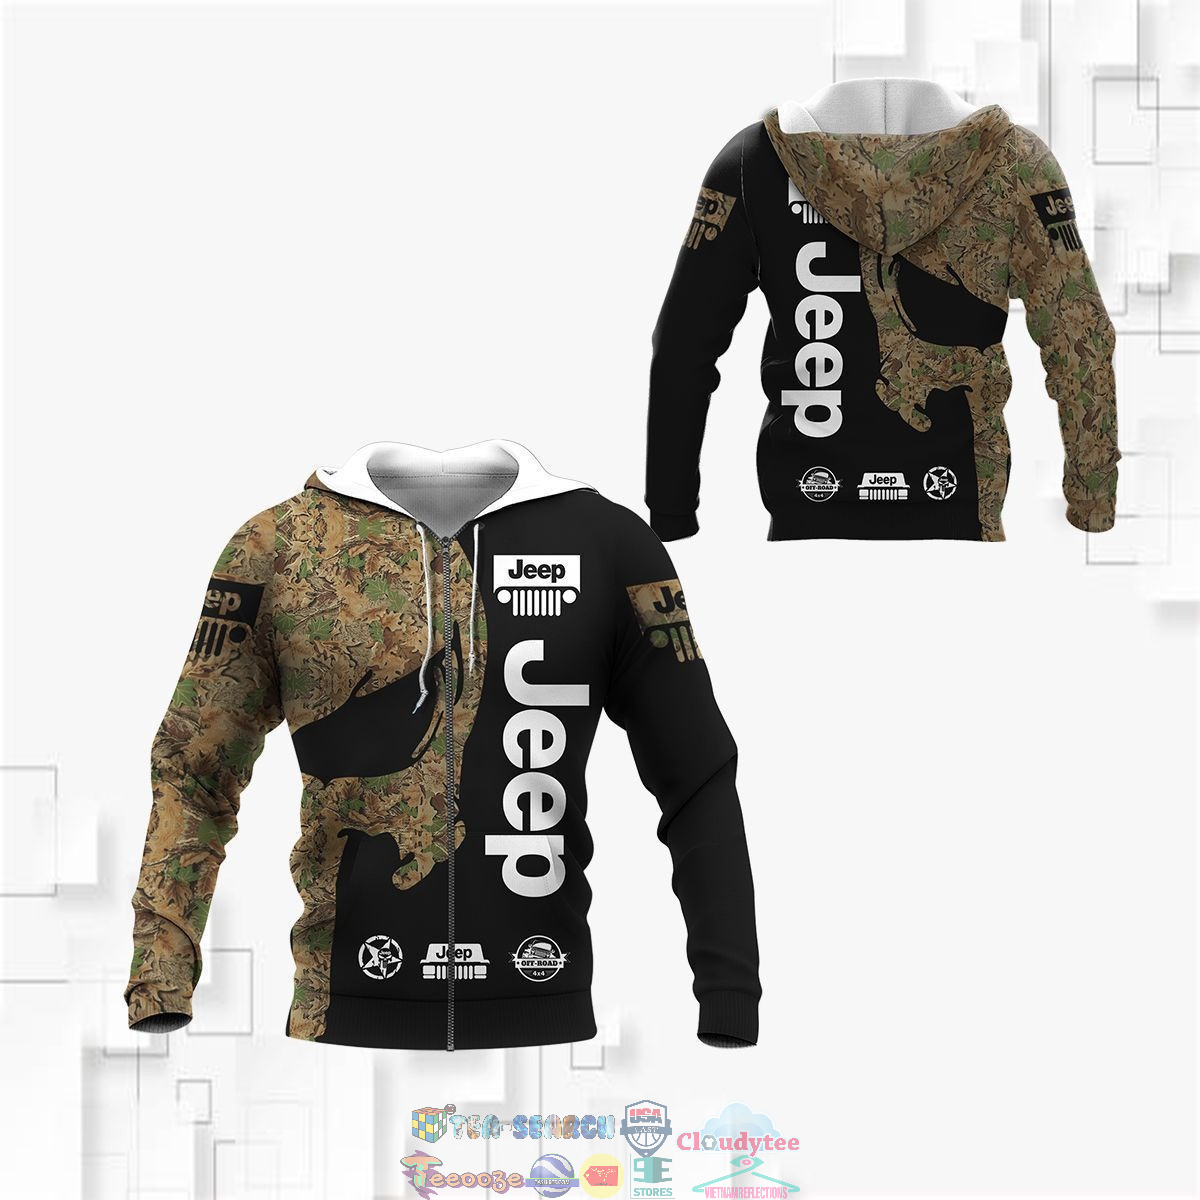 Jeep Skull Camo 3D hoodie and t-shirt